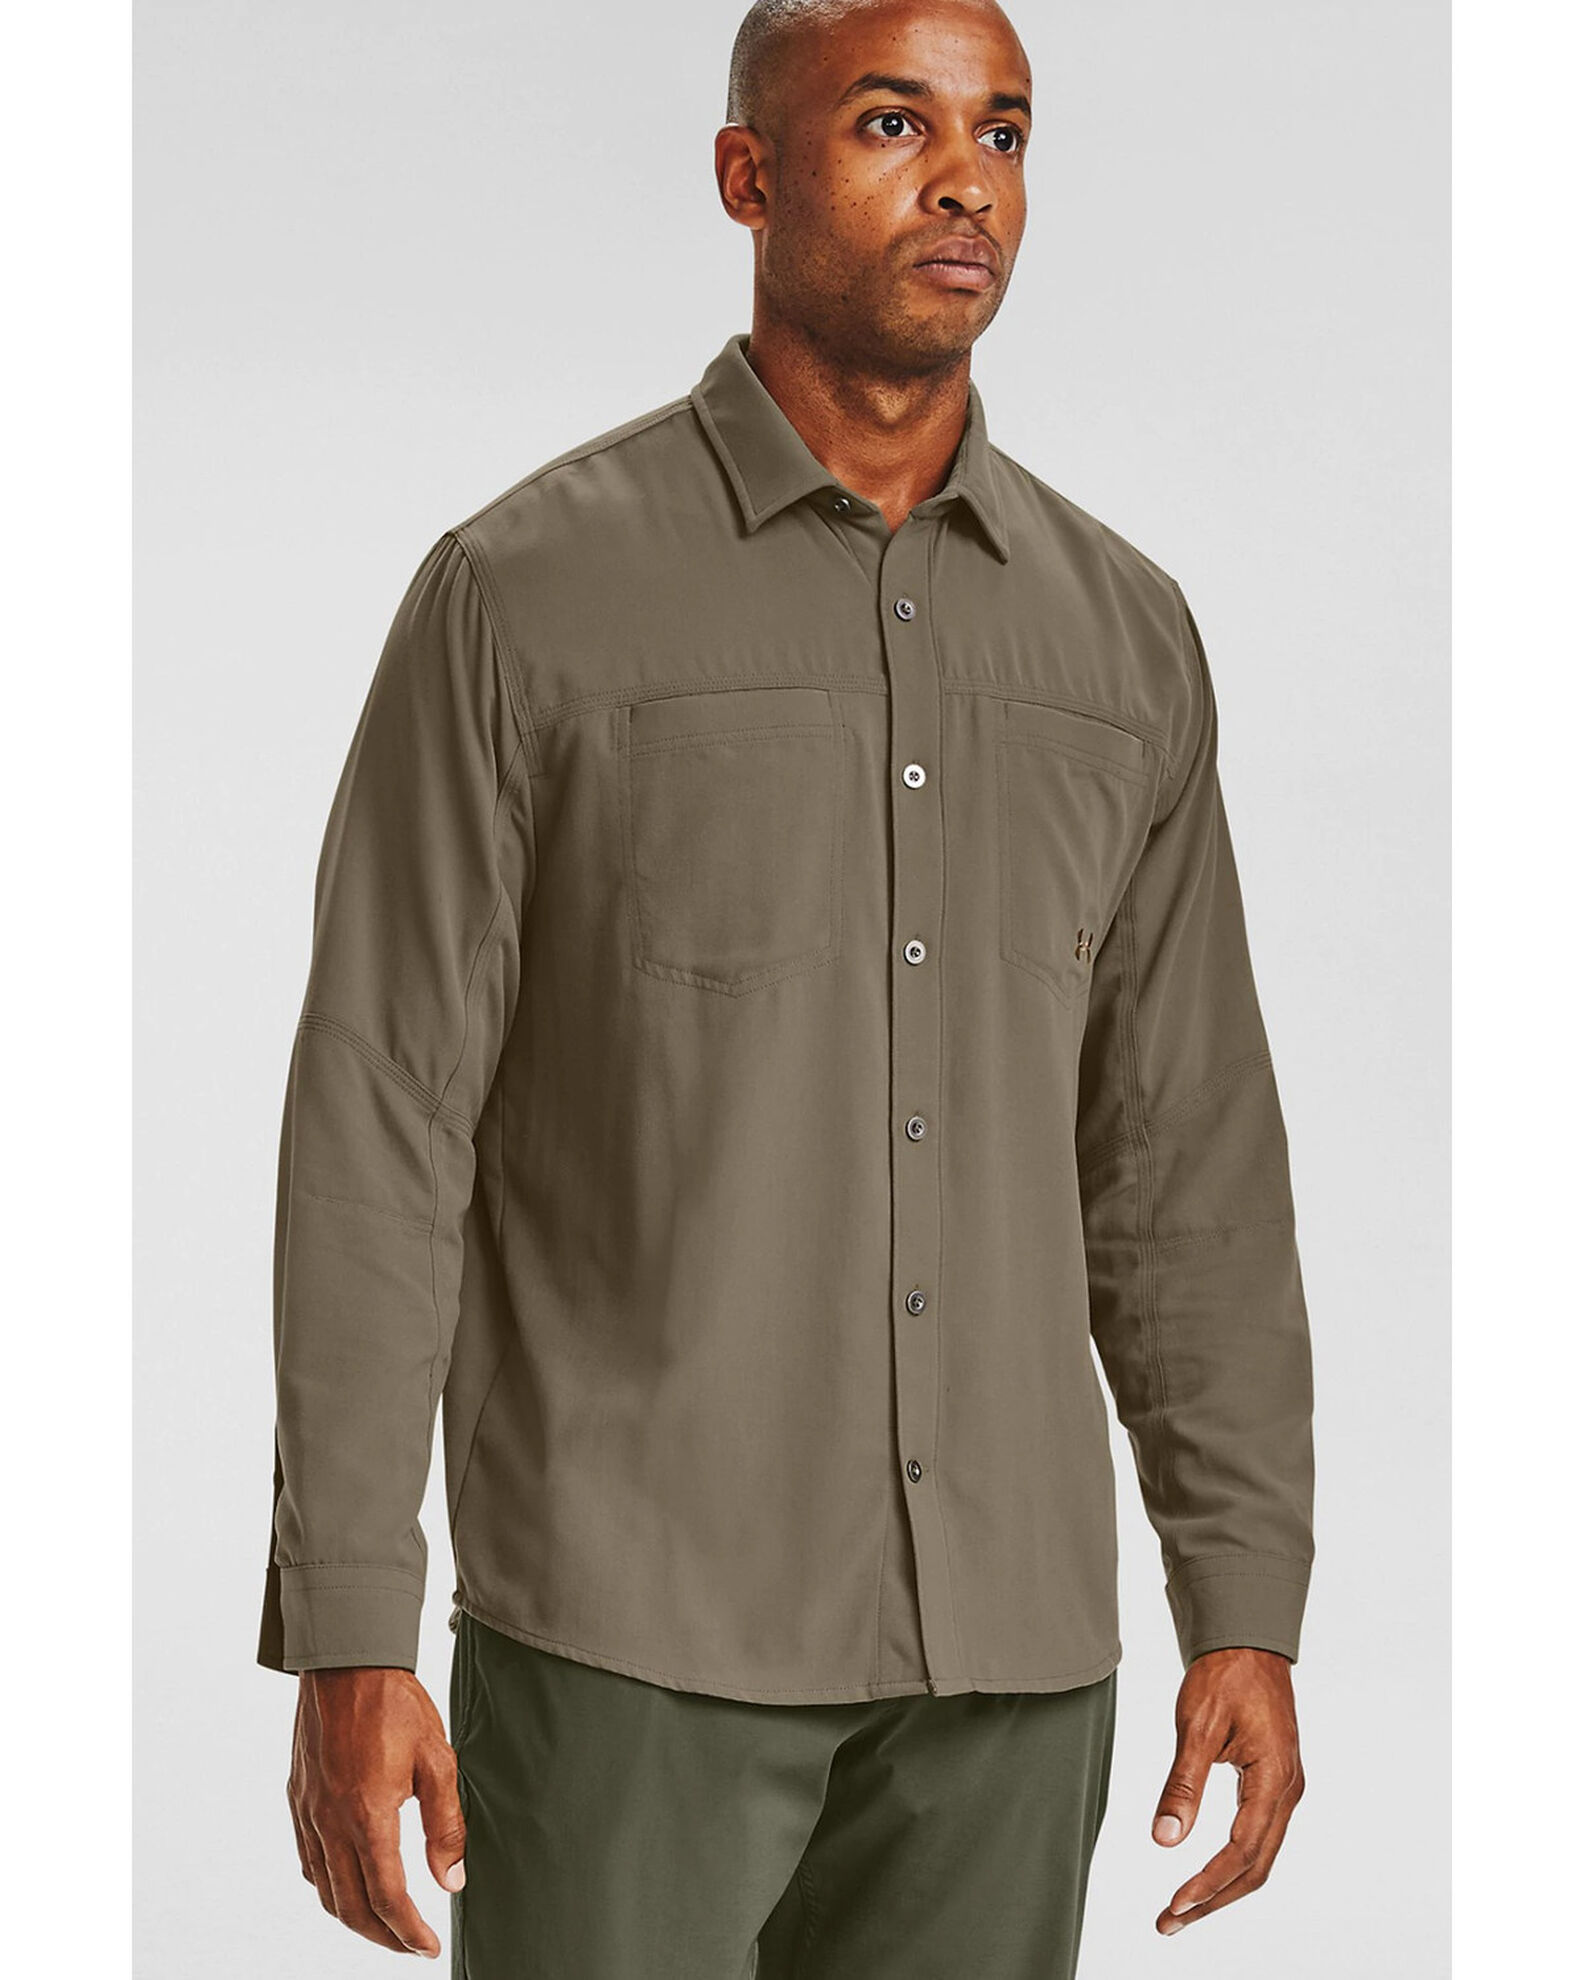 Under Armour Men's Green Payload Button Down Long Sleeve Work Shirt